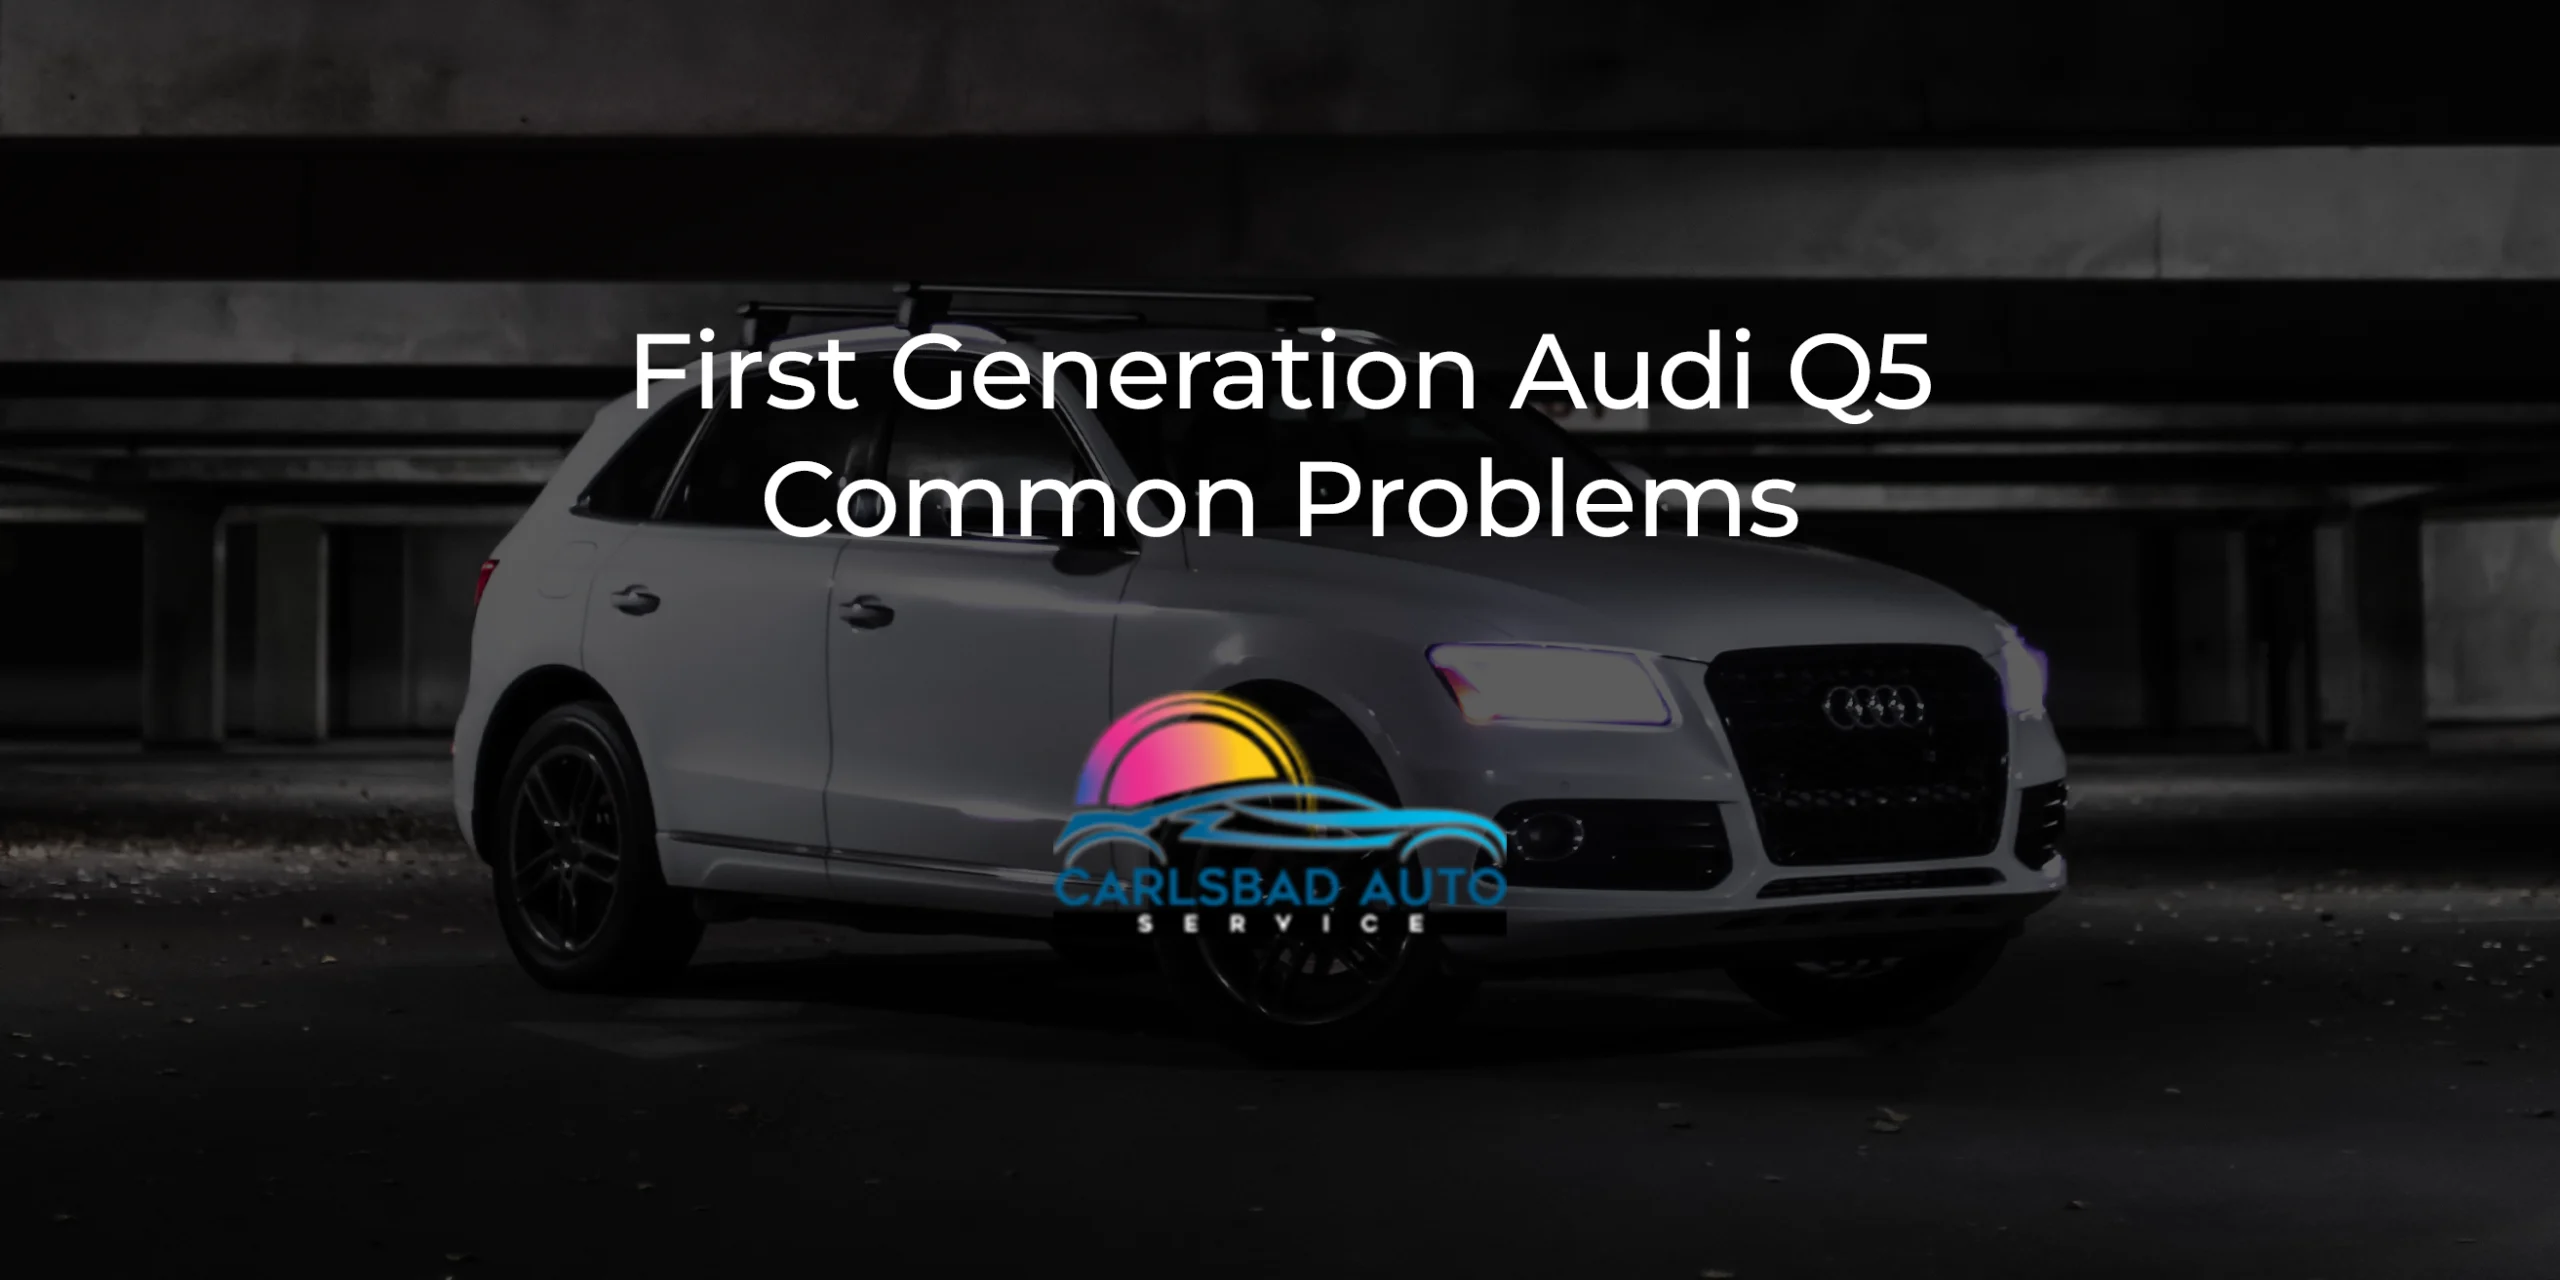 First Generation Audi Q5 Common Problems